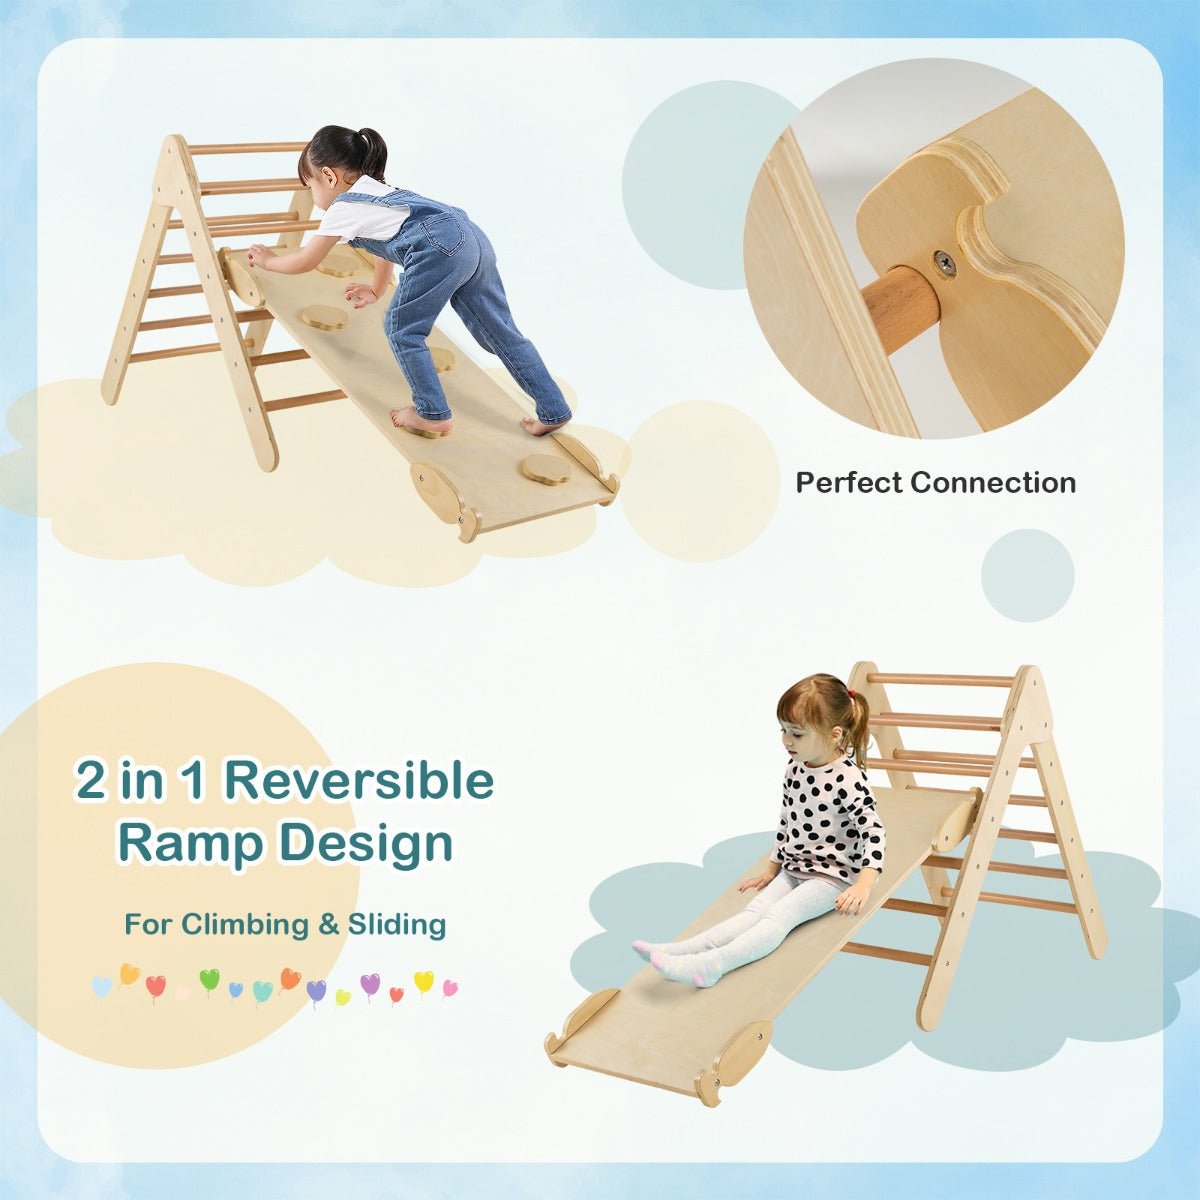 Wholesome Fun: Wooden Climbing Triangle Set with Slide, 3-in-1 Reversible